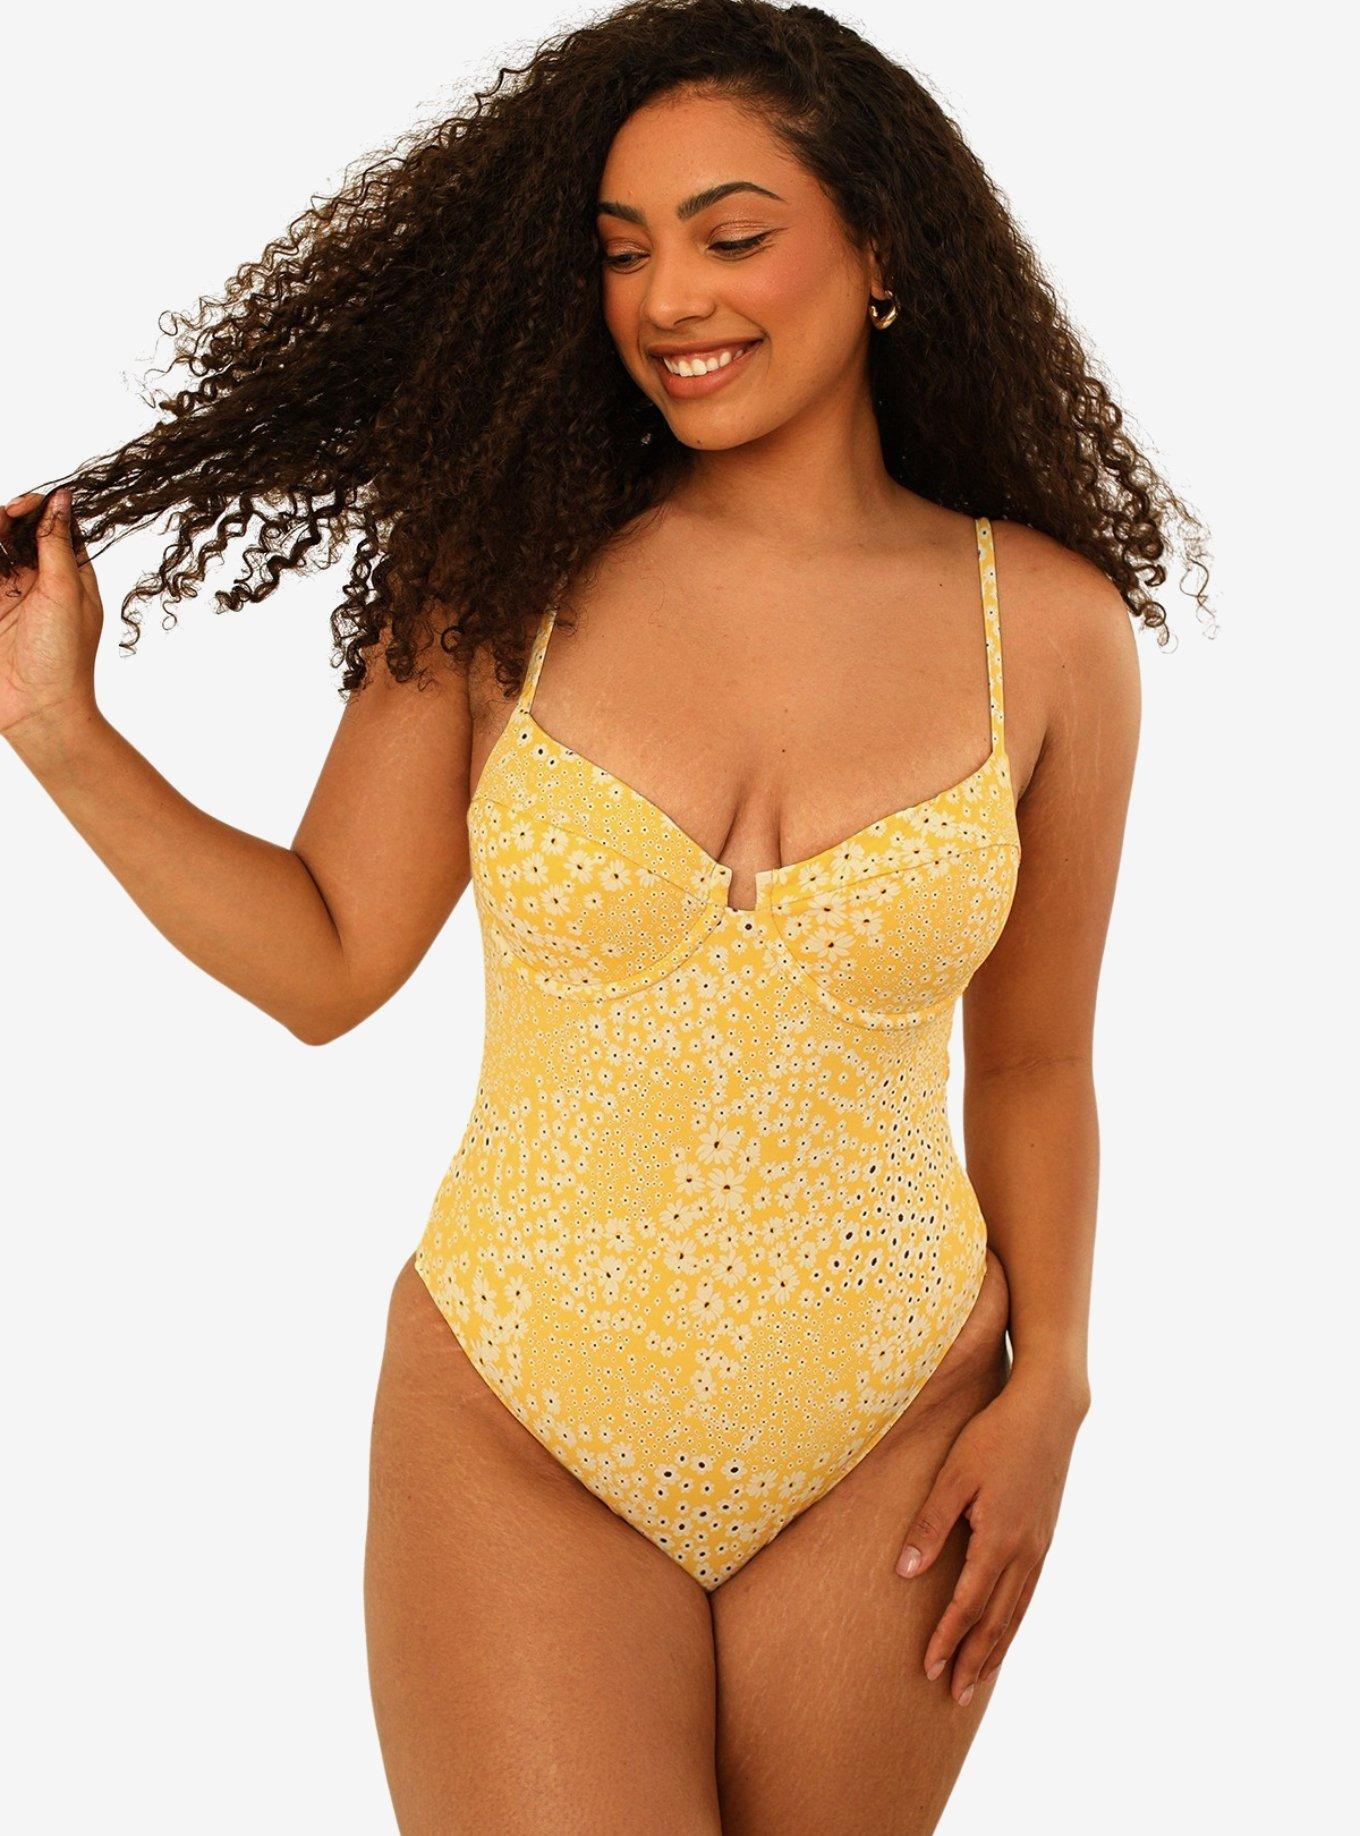 Dippin' Daisy's Saltwater Thigh High Swim One Piece Golden Ditsy, FLORAL - YELLOW, hi-res